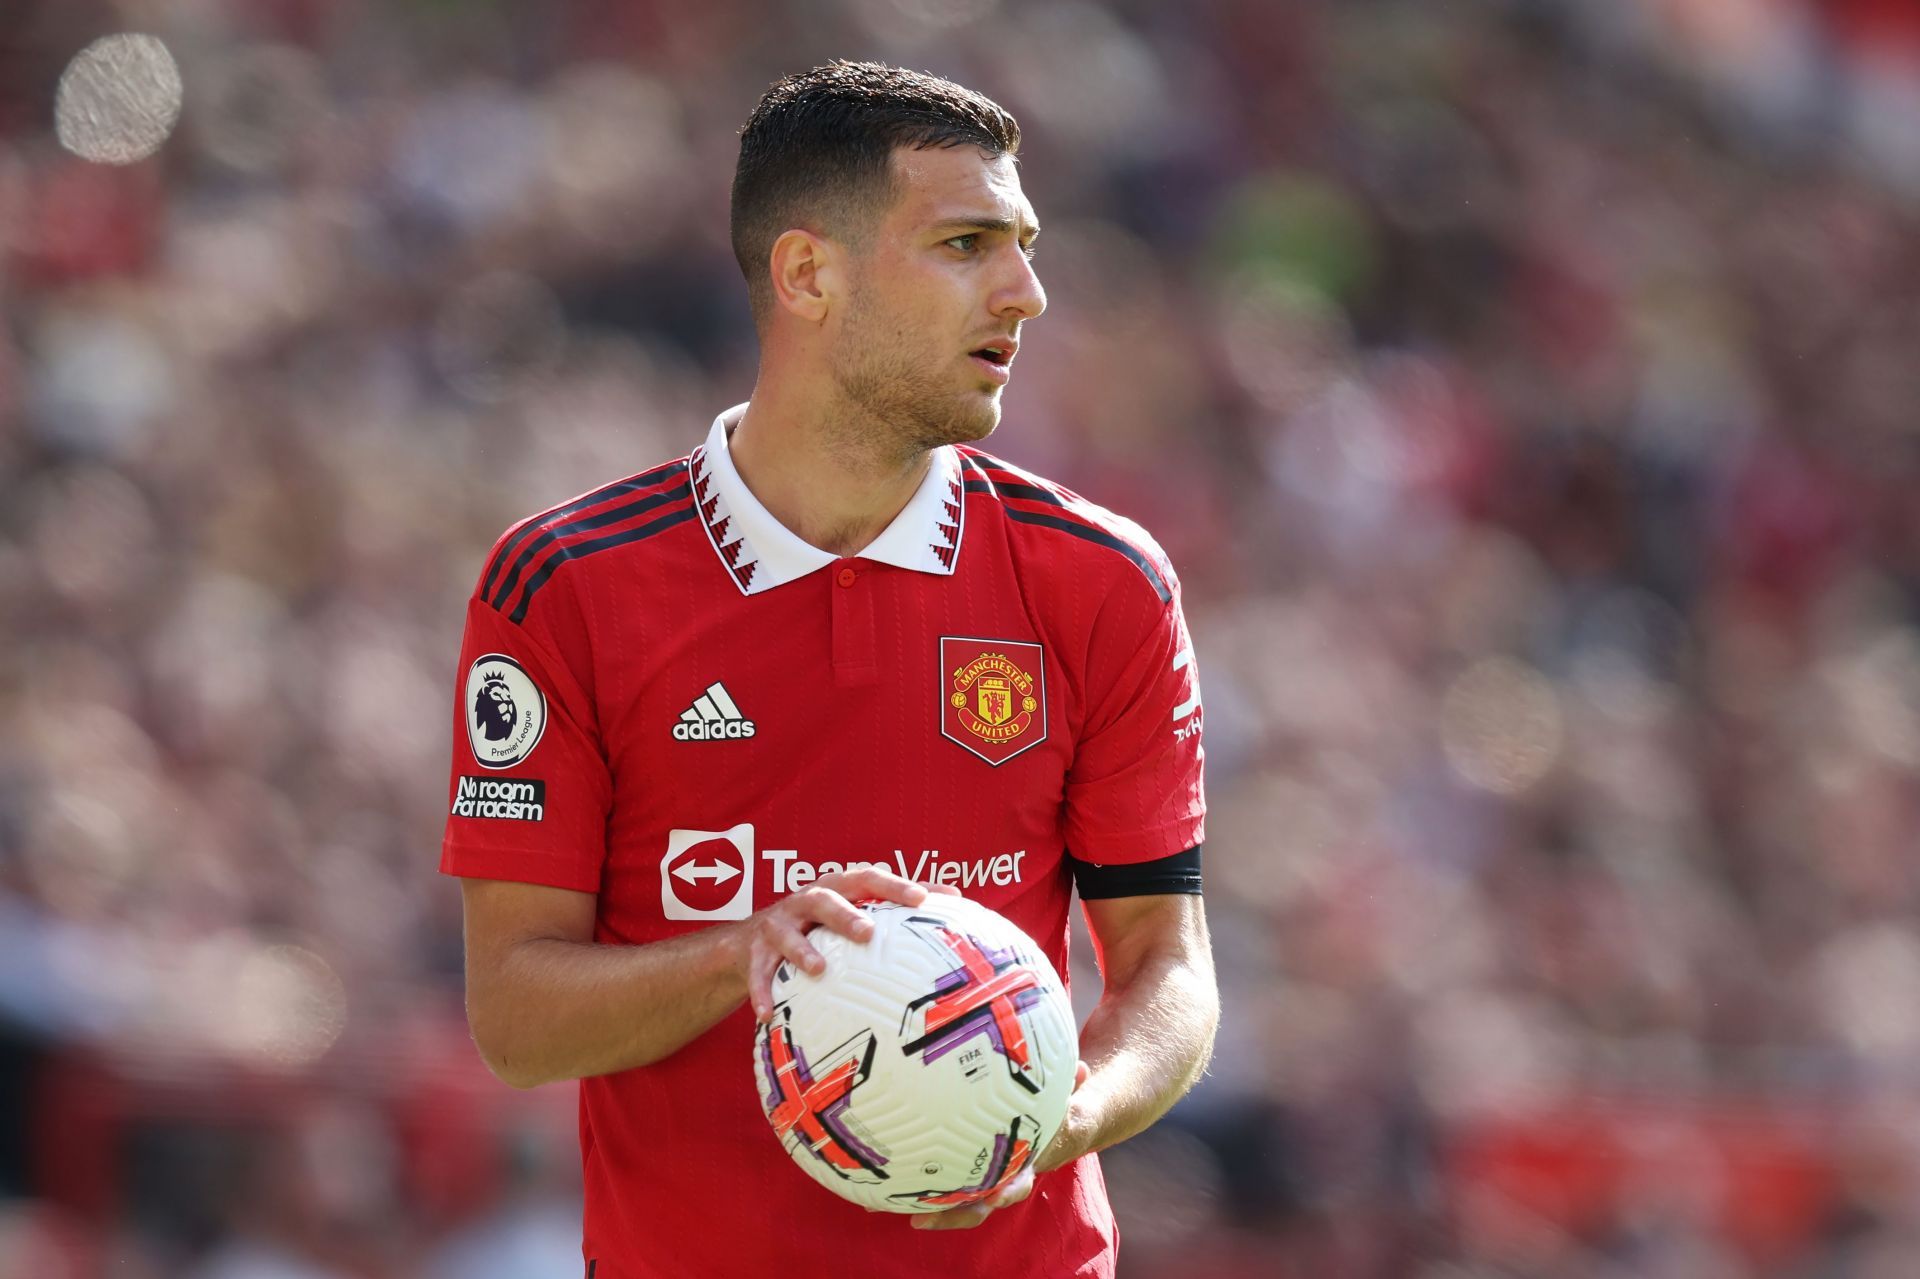 Diogo Dalot has committed his future at Old Trafford.